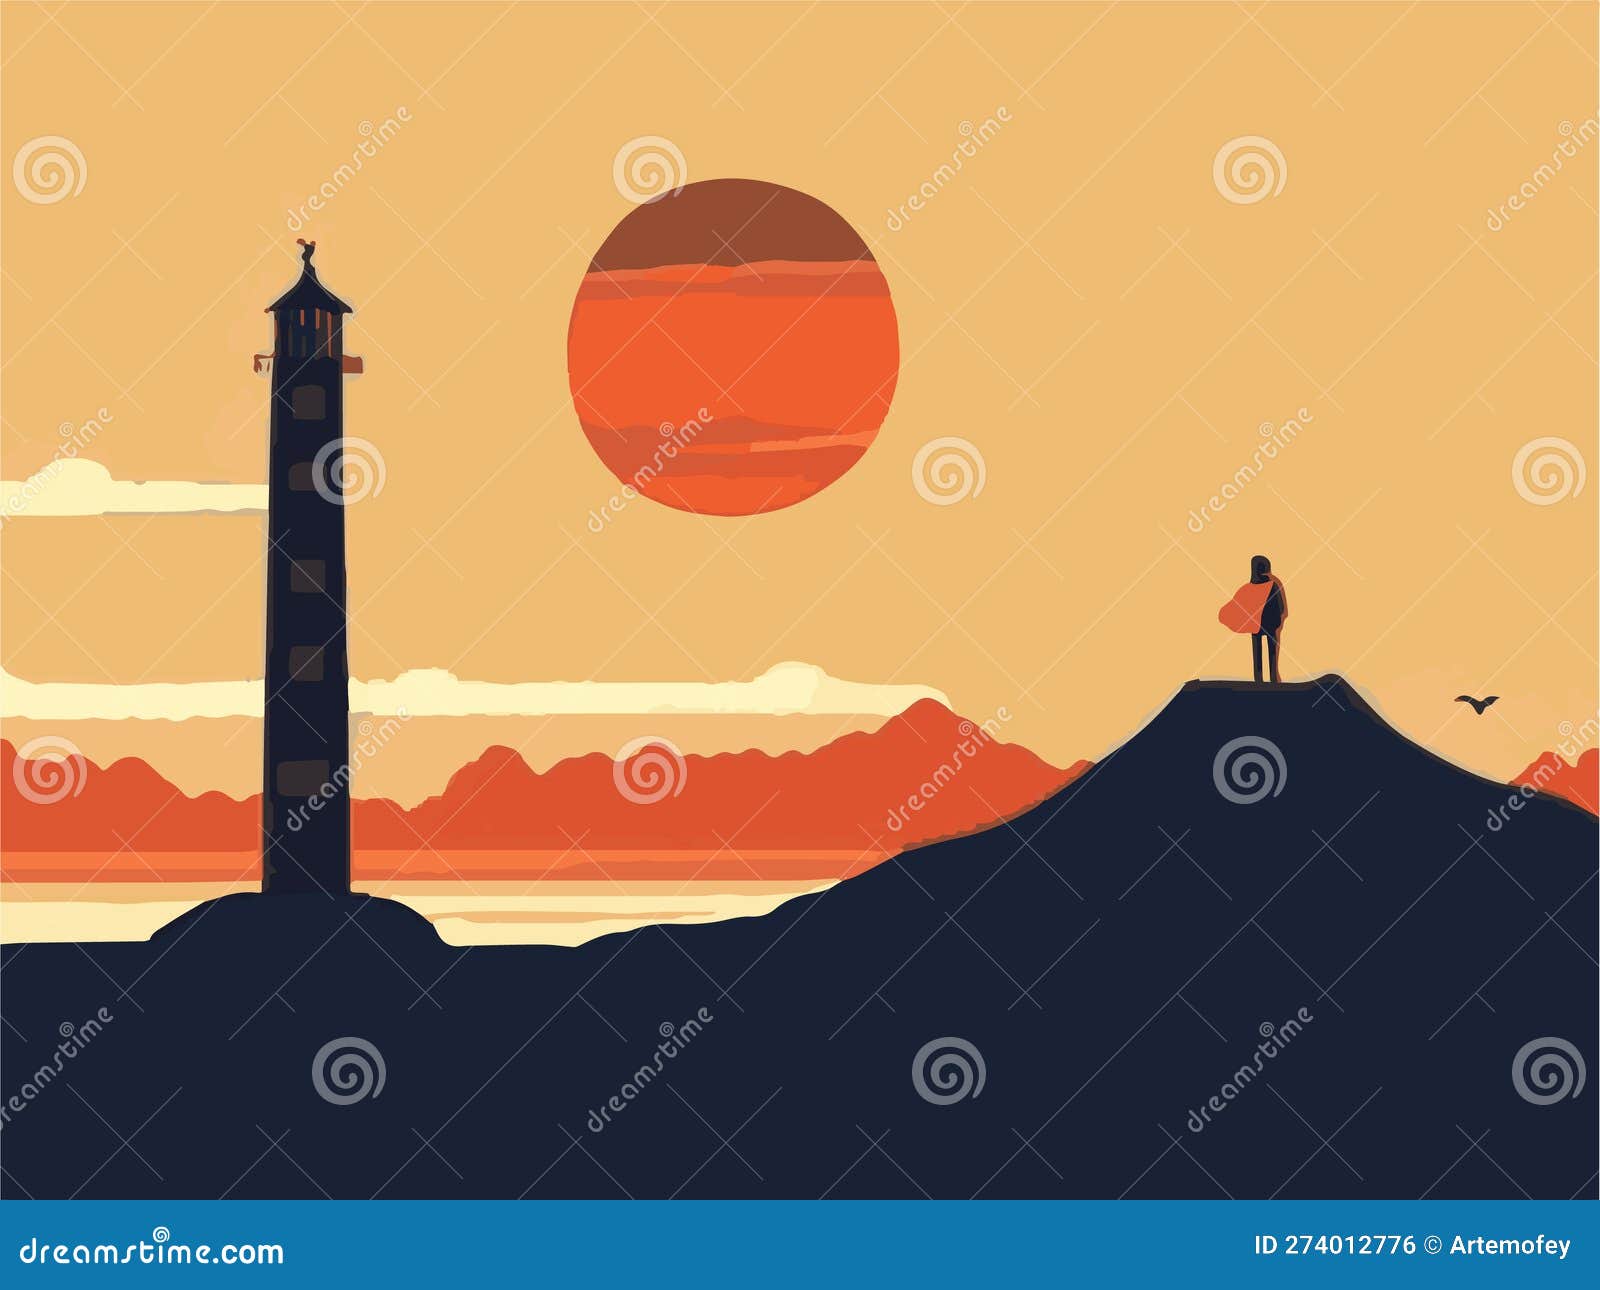 lighthouse, hill, sunset and cloudy in the sky